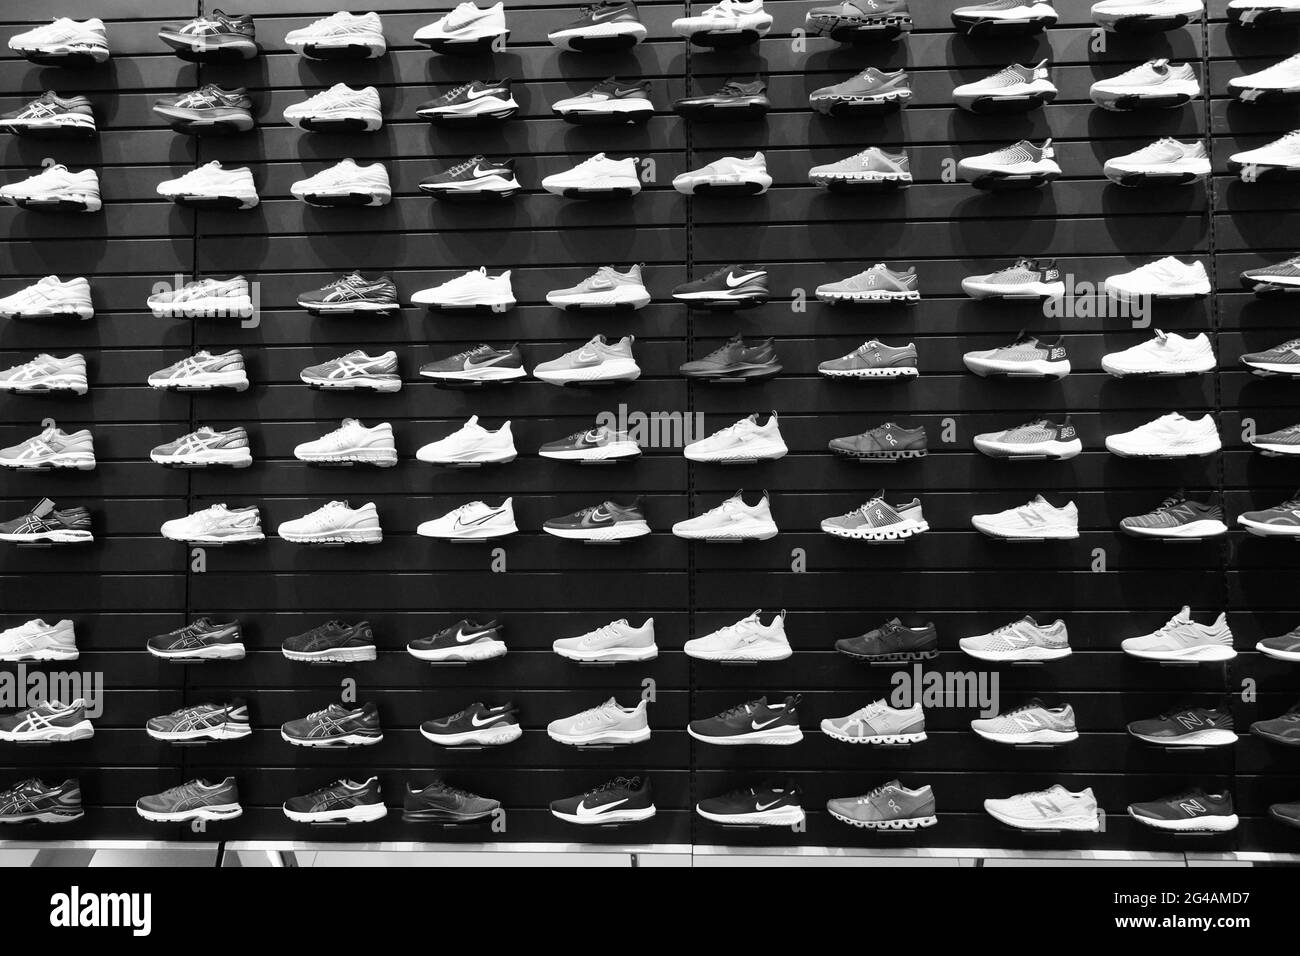 Black and White Image Shop display of lot of Sports shoes on wall. View of a wall of shoes inside the store. Modern new stylish sneakers running shoes Stock Photo